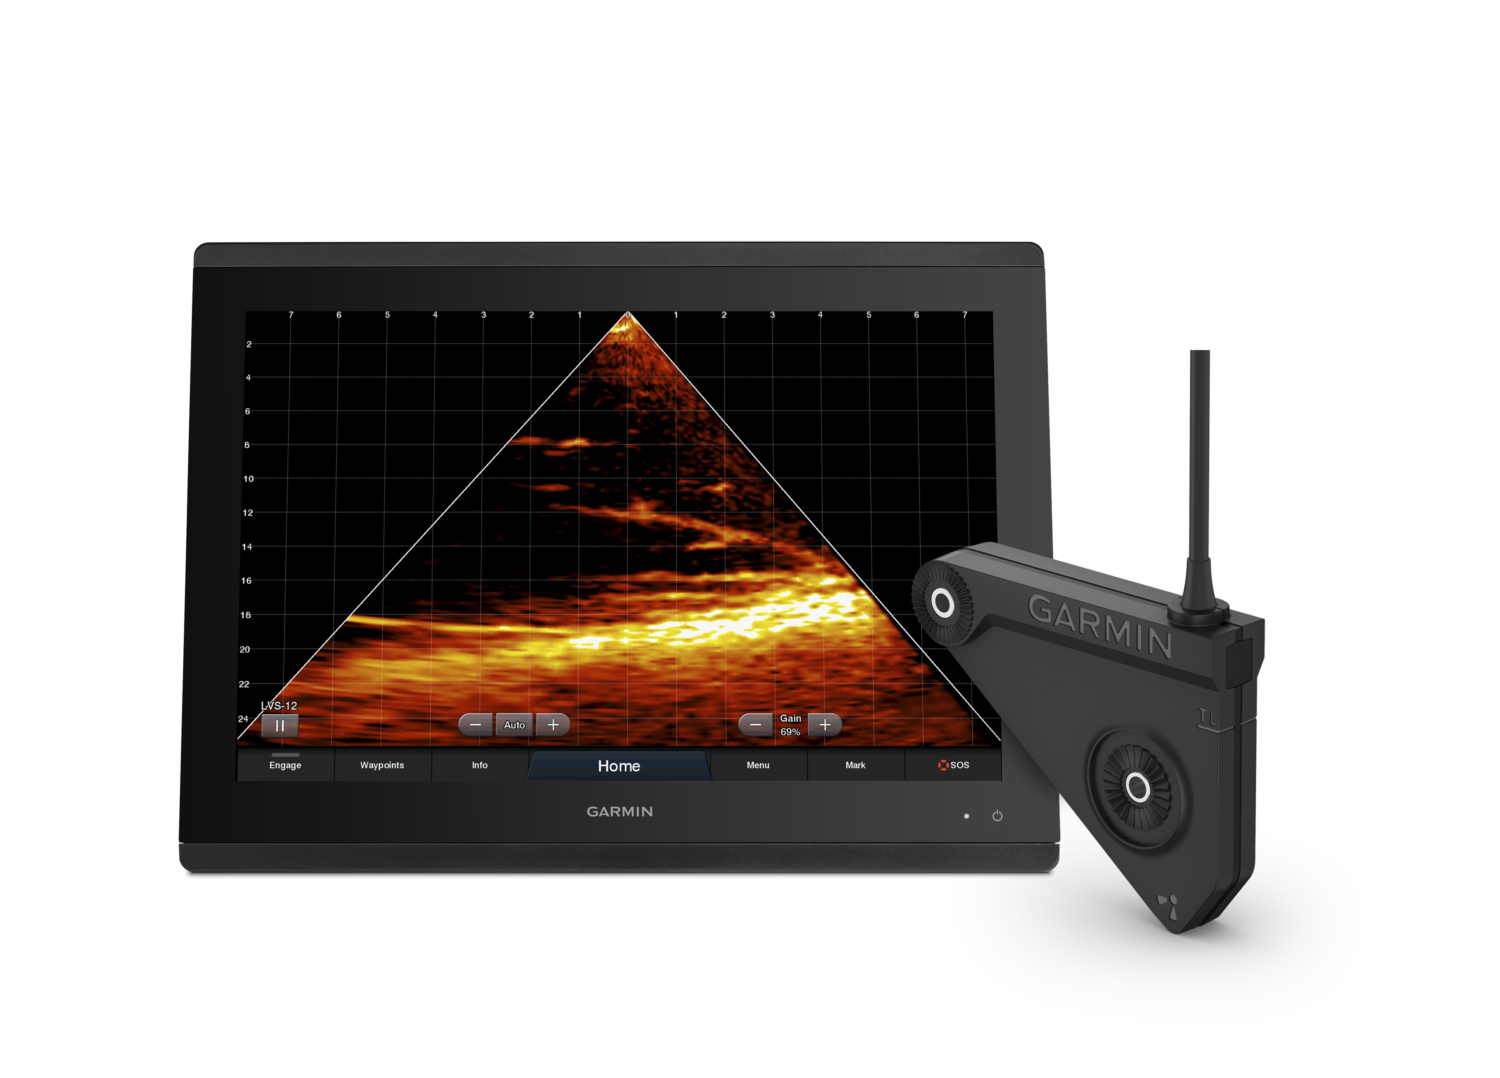 Garmin Brings Panoptix LiveScope Live Scanning Sonar To Even More Anglers With The New Single